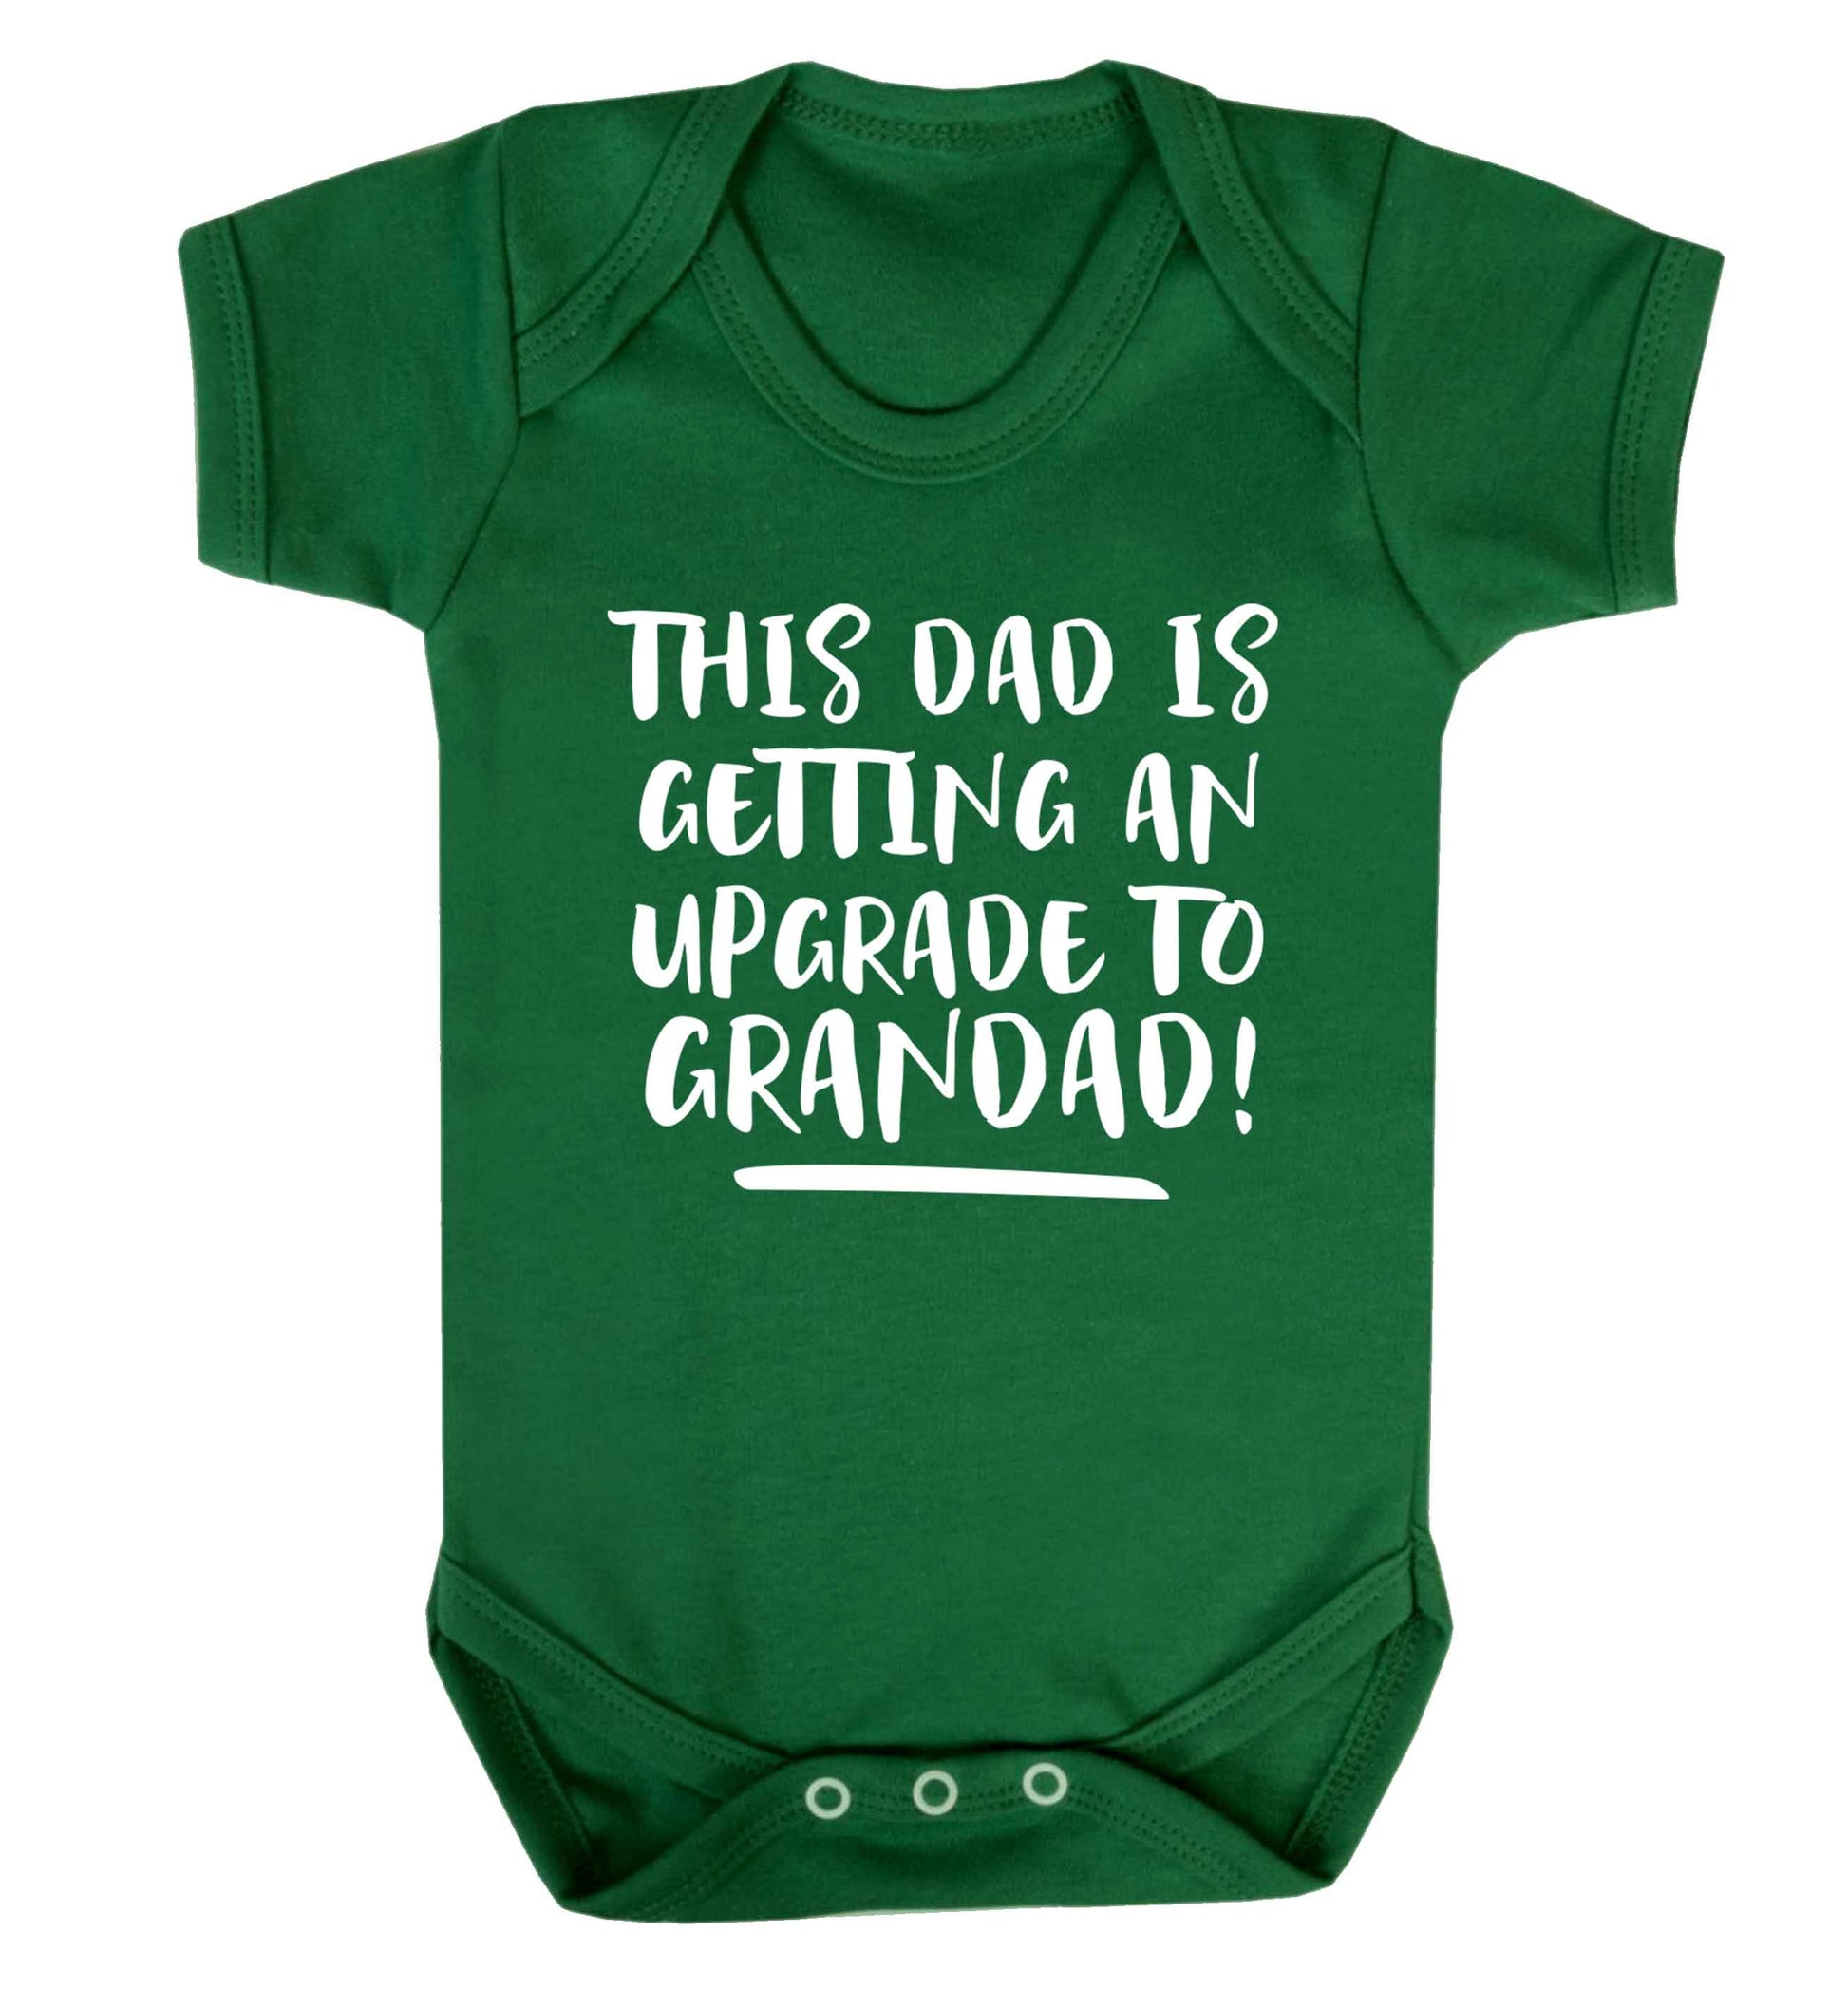 This dad is getting an upgrade to grandad! Baby Vest green 18-24 months